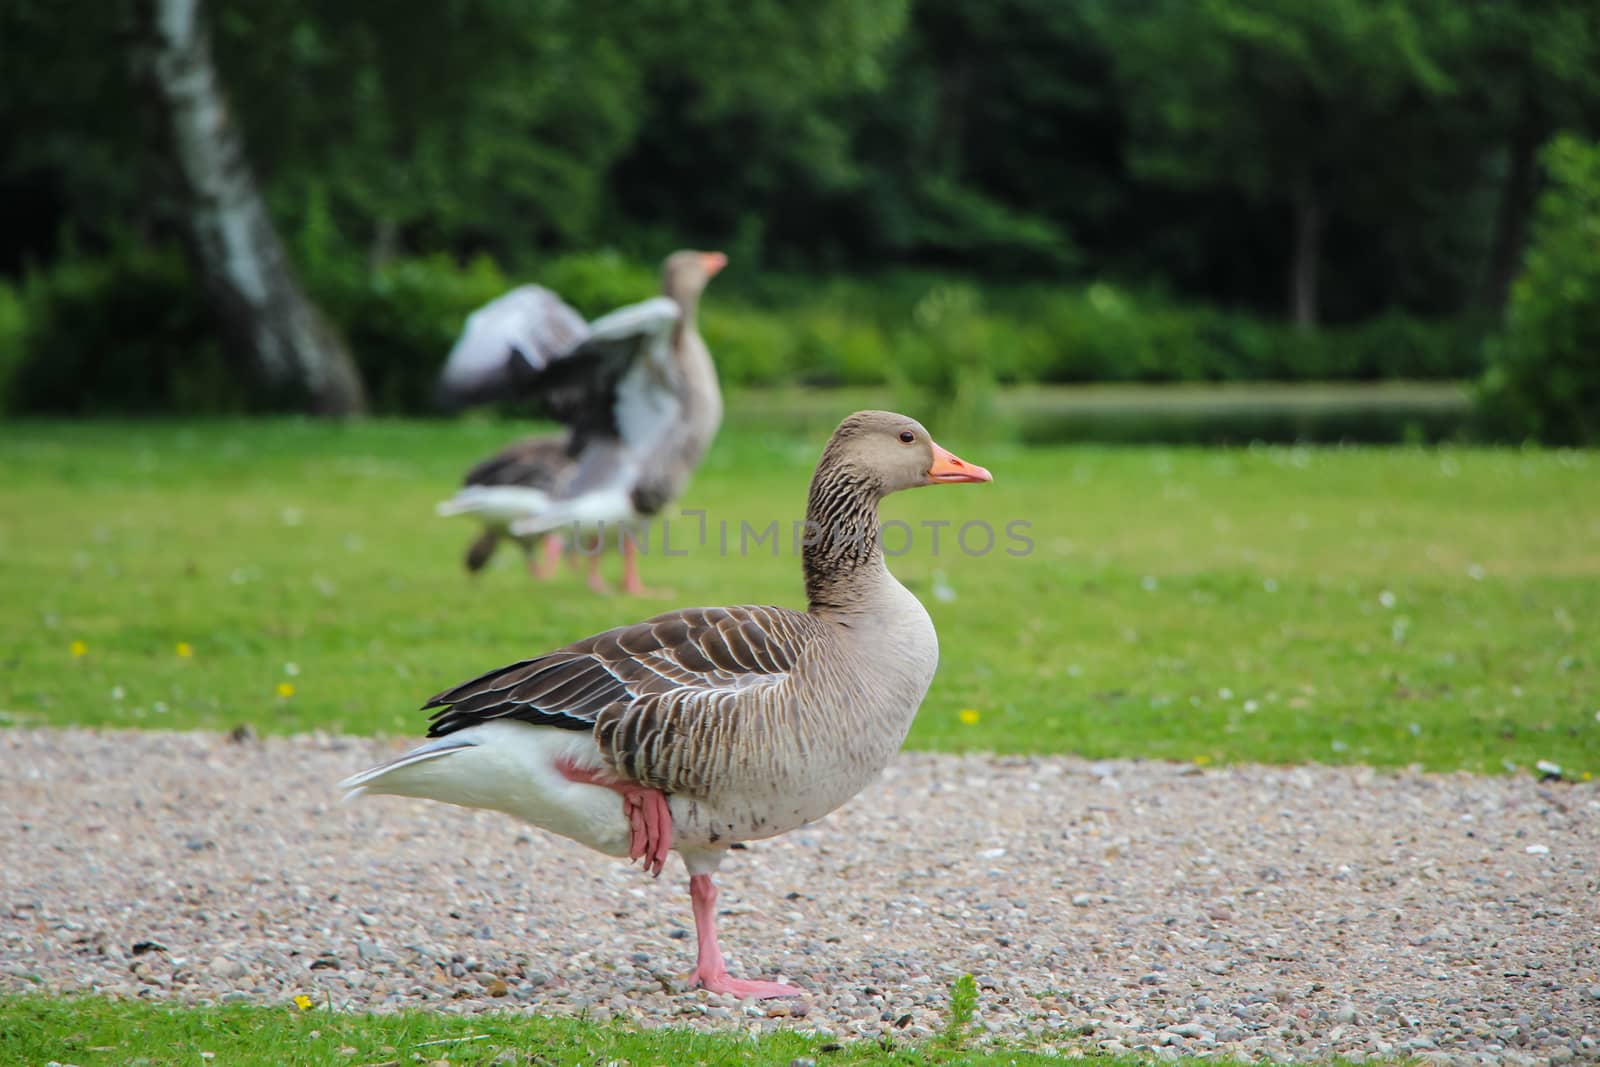 Geese by Mads_Hjorth_Jakobsen